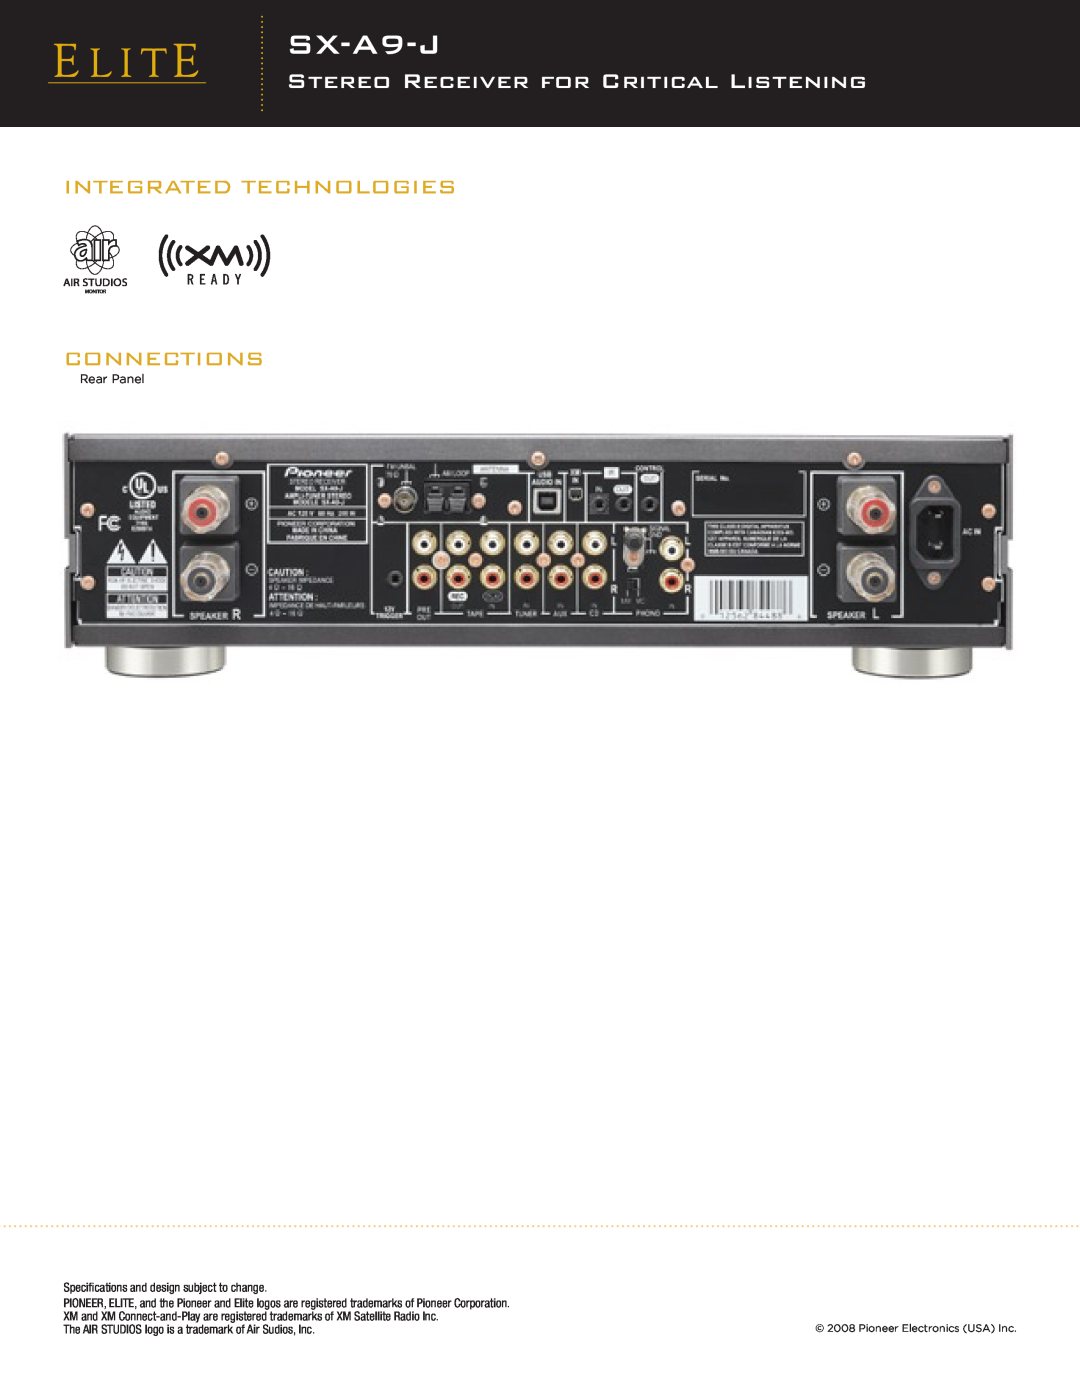 Elite SX-A9-J manual Integrated Technologies, Stereo Receiver For Critical Listening, Connections 